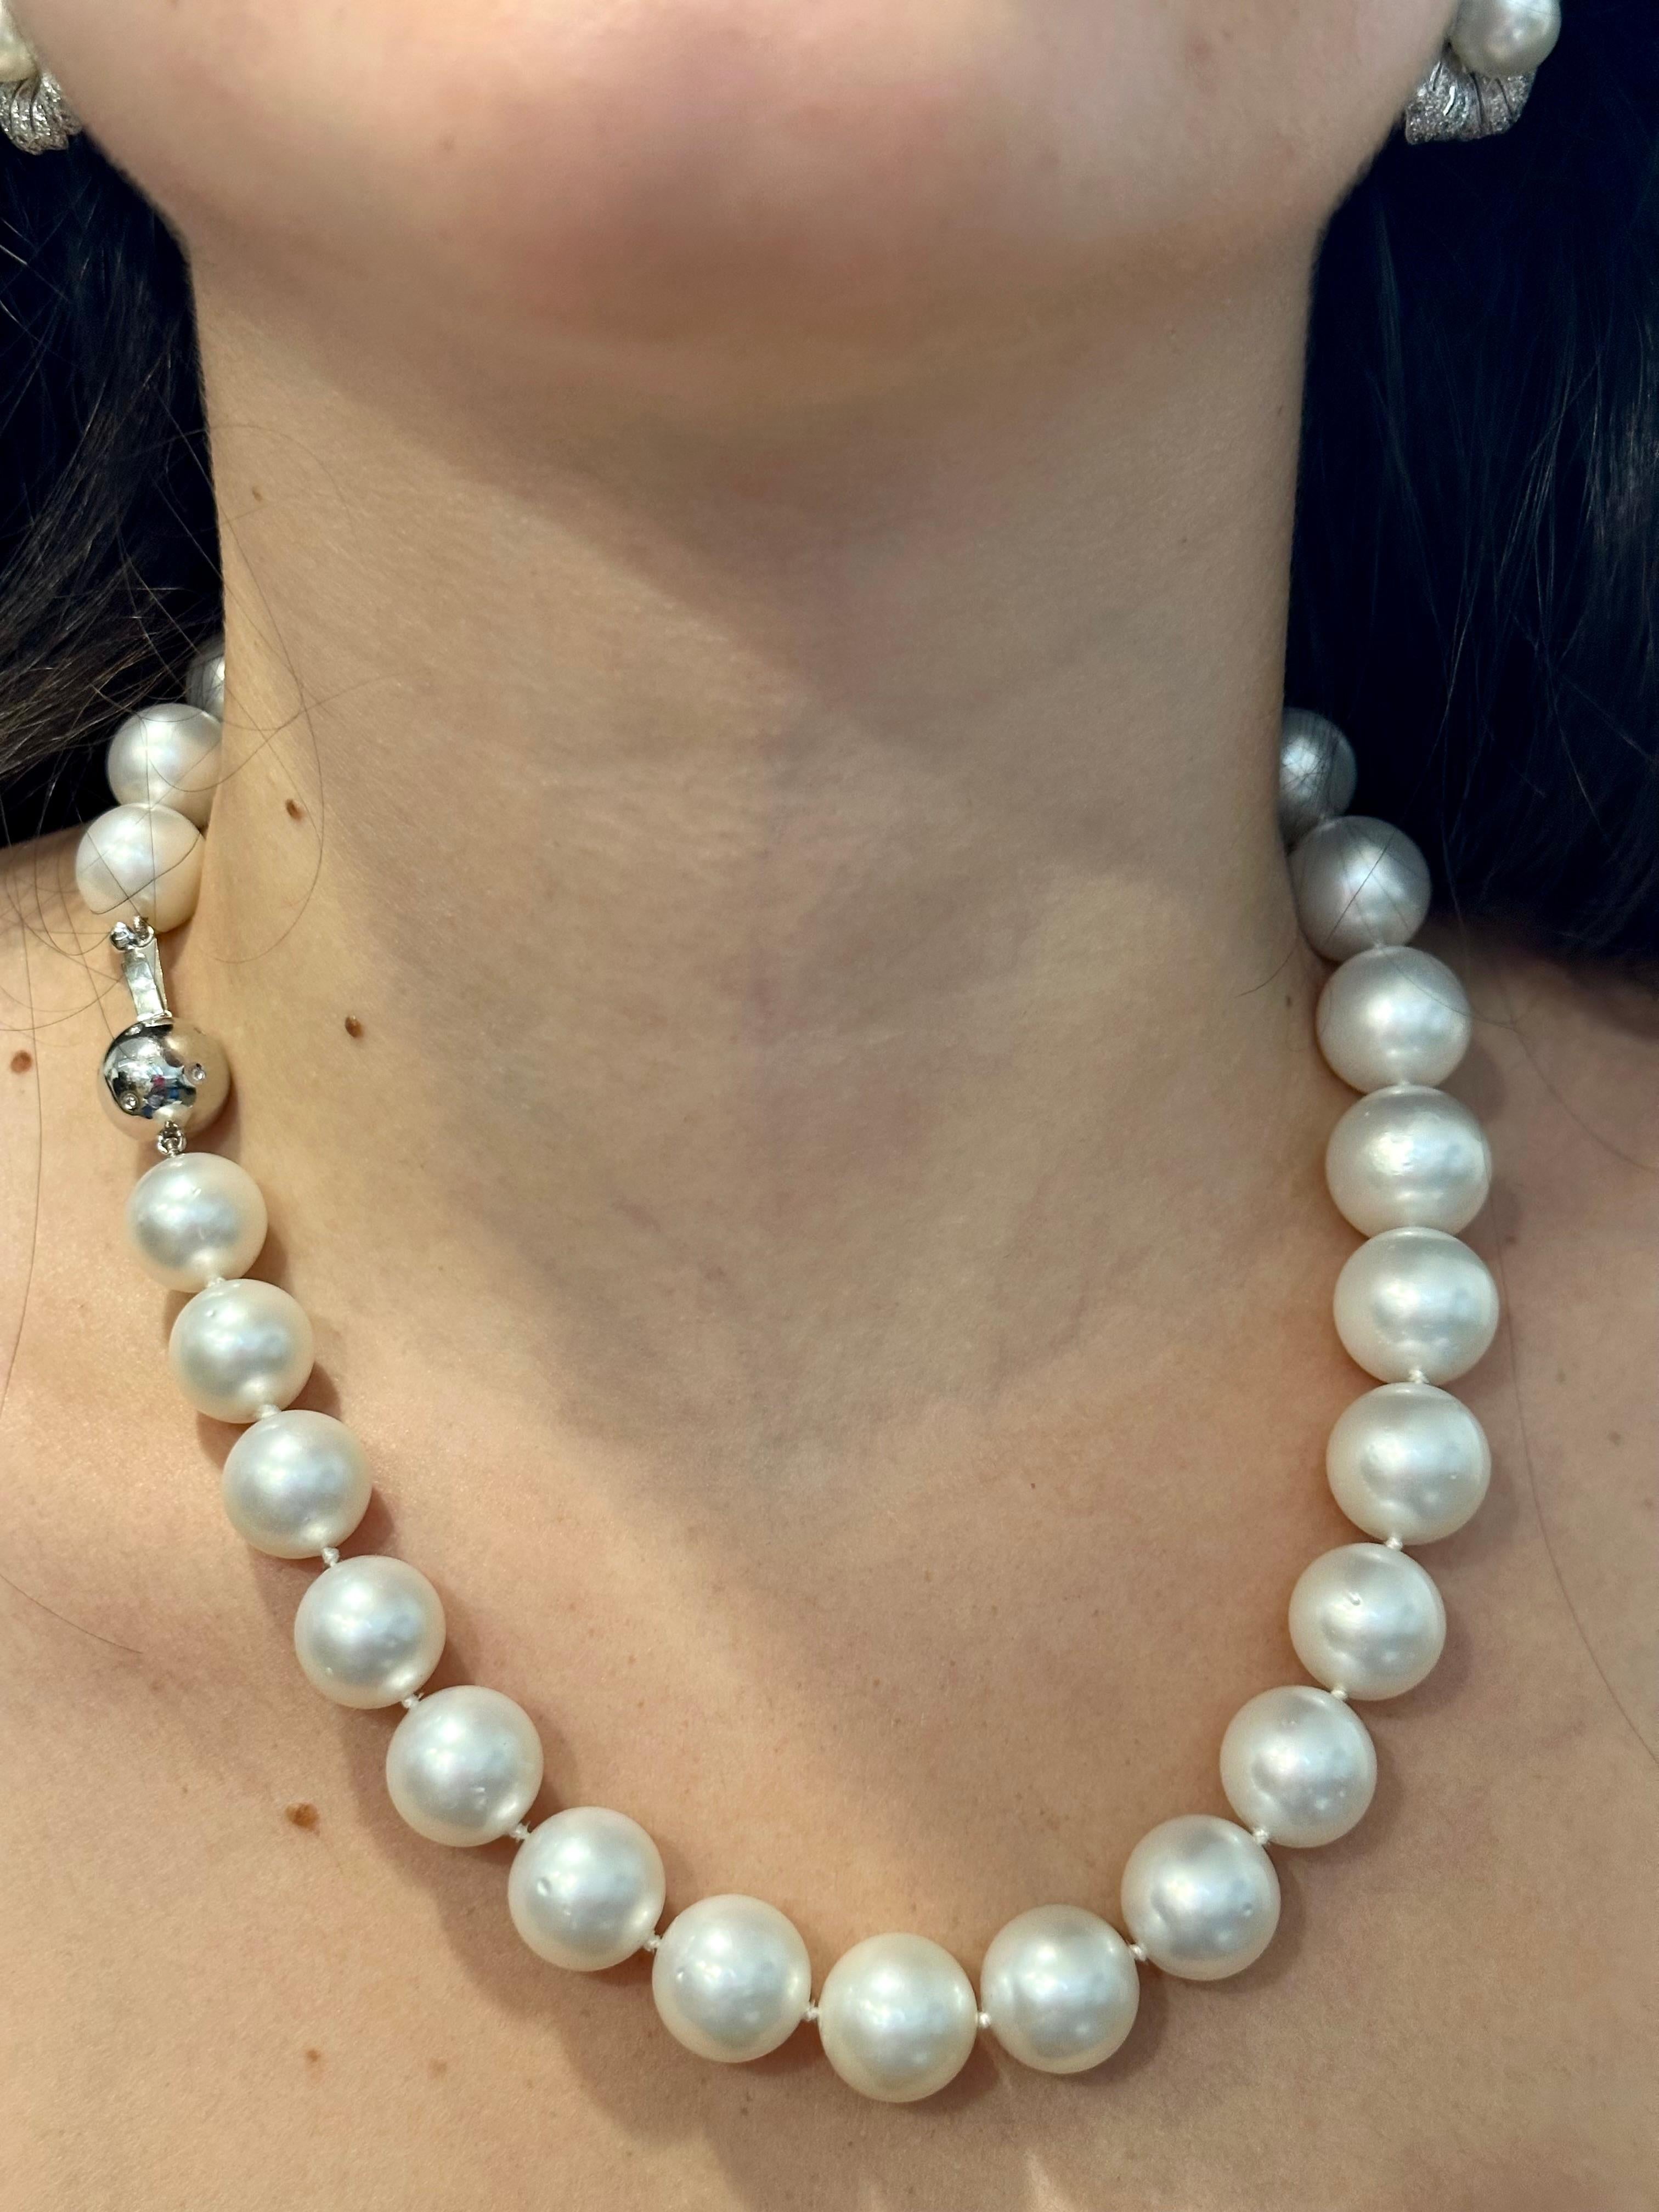 13-16.5mm White South Sea Round Pearl Necklace - AAA Quality, 29 Pieces +Diamond For Sale 8